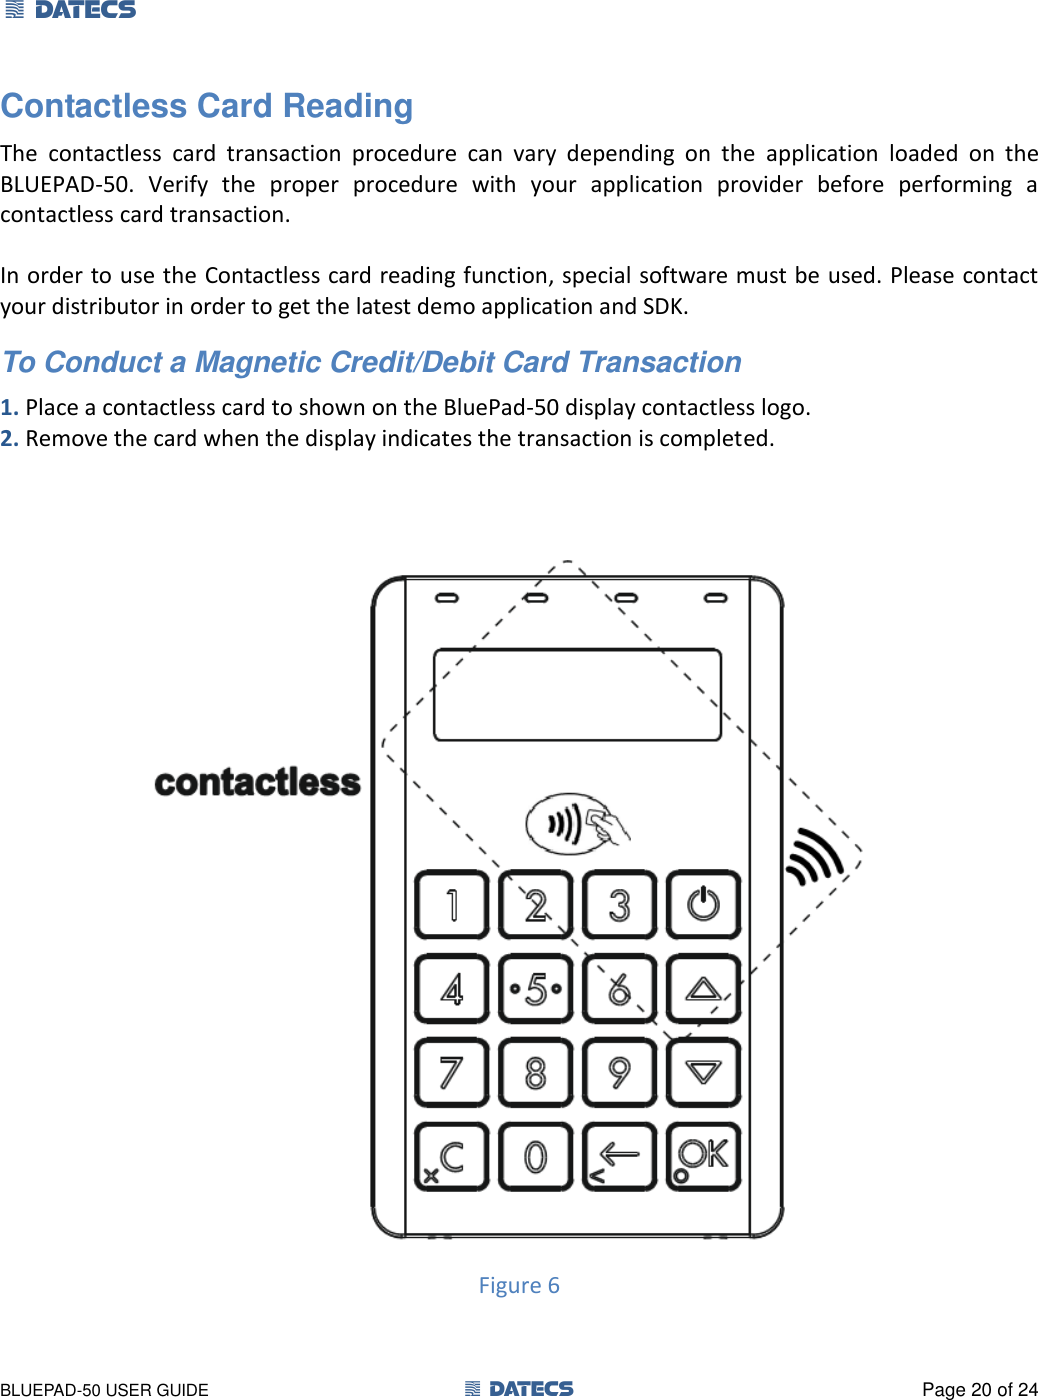 1 DATECS       BLUEPAD-50 USER GUIDE  1 DATECS  Page 20 of 24 Contactless Card Reading The  contactless  card  transaction  procedure  can  vary  depending  on  the  application  loaded  on  the BLUEPAD-50.  Verify  the  proper  procedure  with  your  application  provider  before  performing  a contactless card transaction.  In order to use the Contactless card reading function, special software must be used. Please contact your distributor in order to get the latest demo application and SDK. To Conduct a Magnetic Credit/Debit Card Transaction 1. Place a contactless card to shown on the BluePad-50 display contactless logo. 2. Remove the card when the display indicates the transaction is completed.   Figure 6  